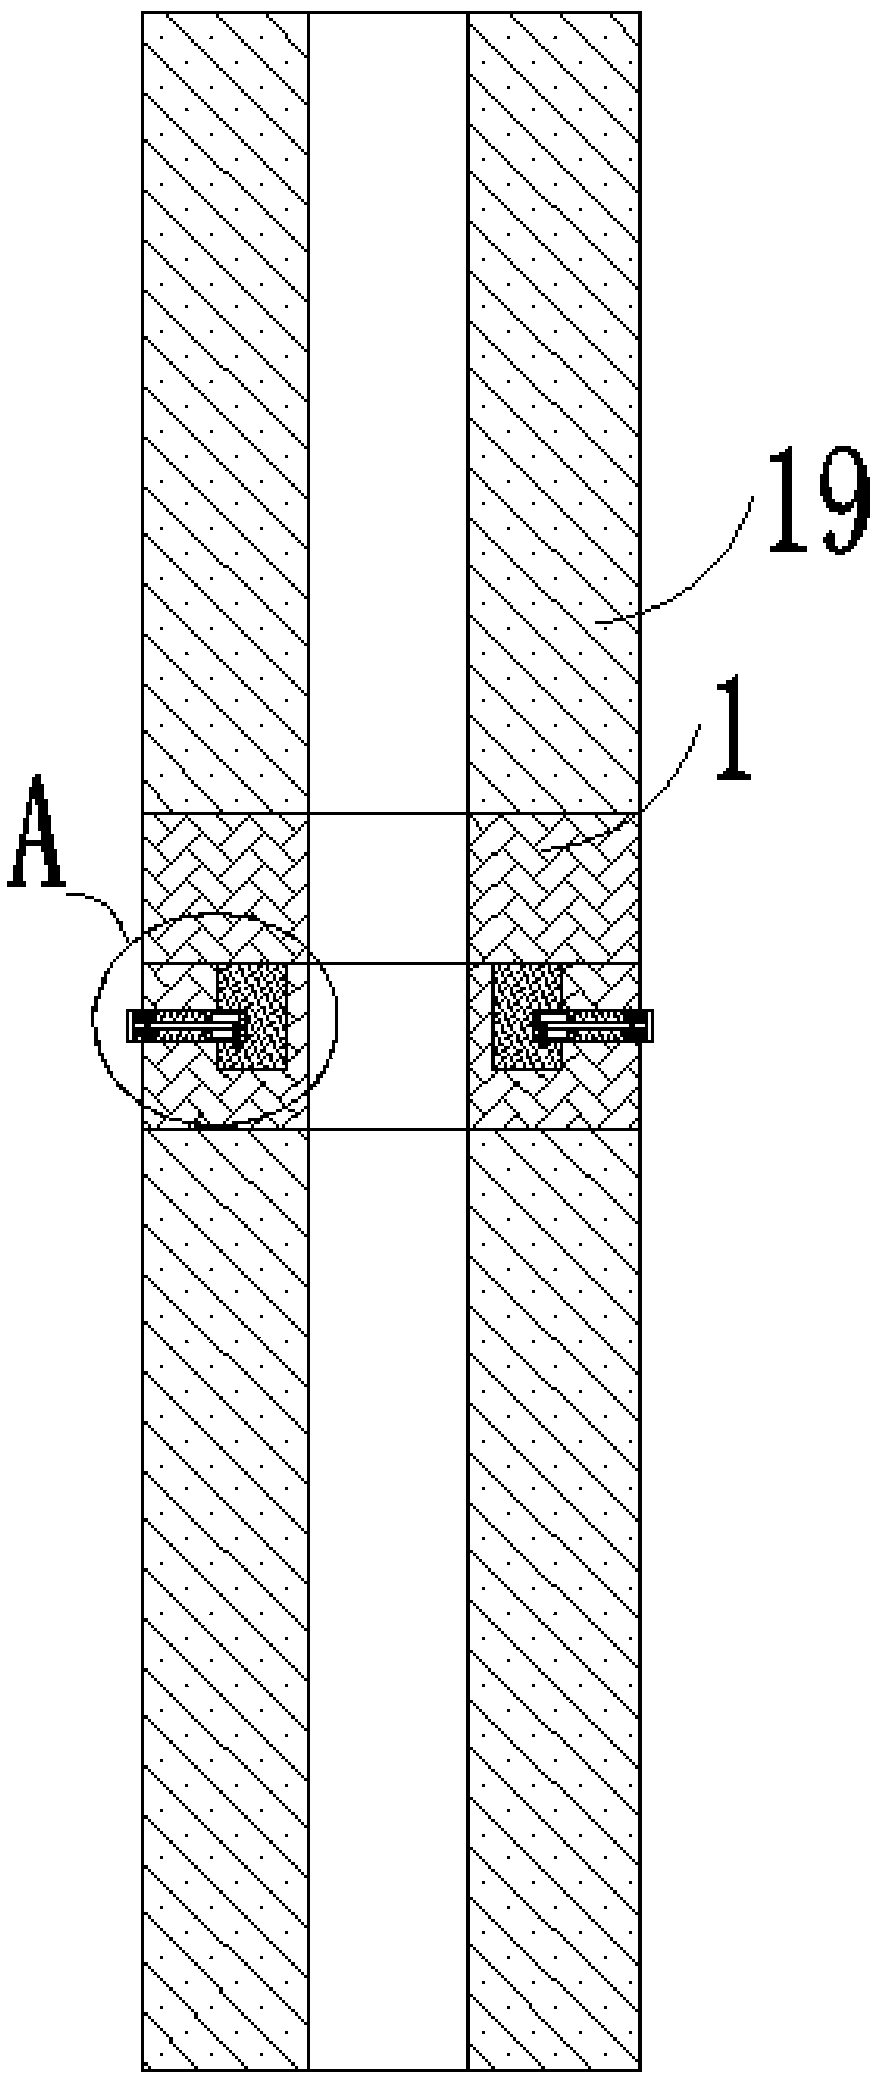 Connection structure of prestressed concrete pipe piles